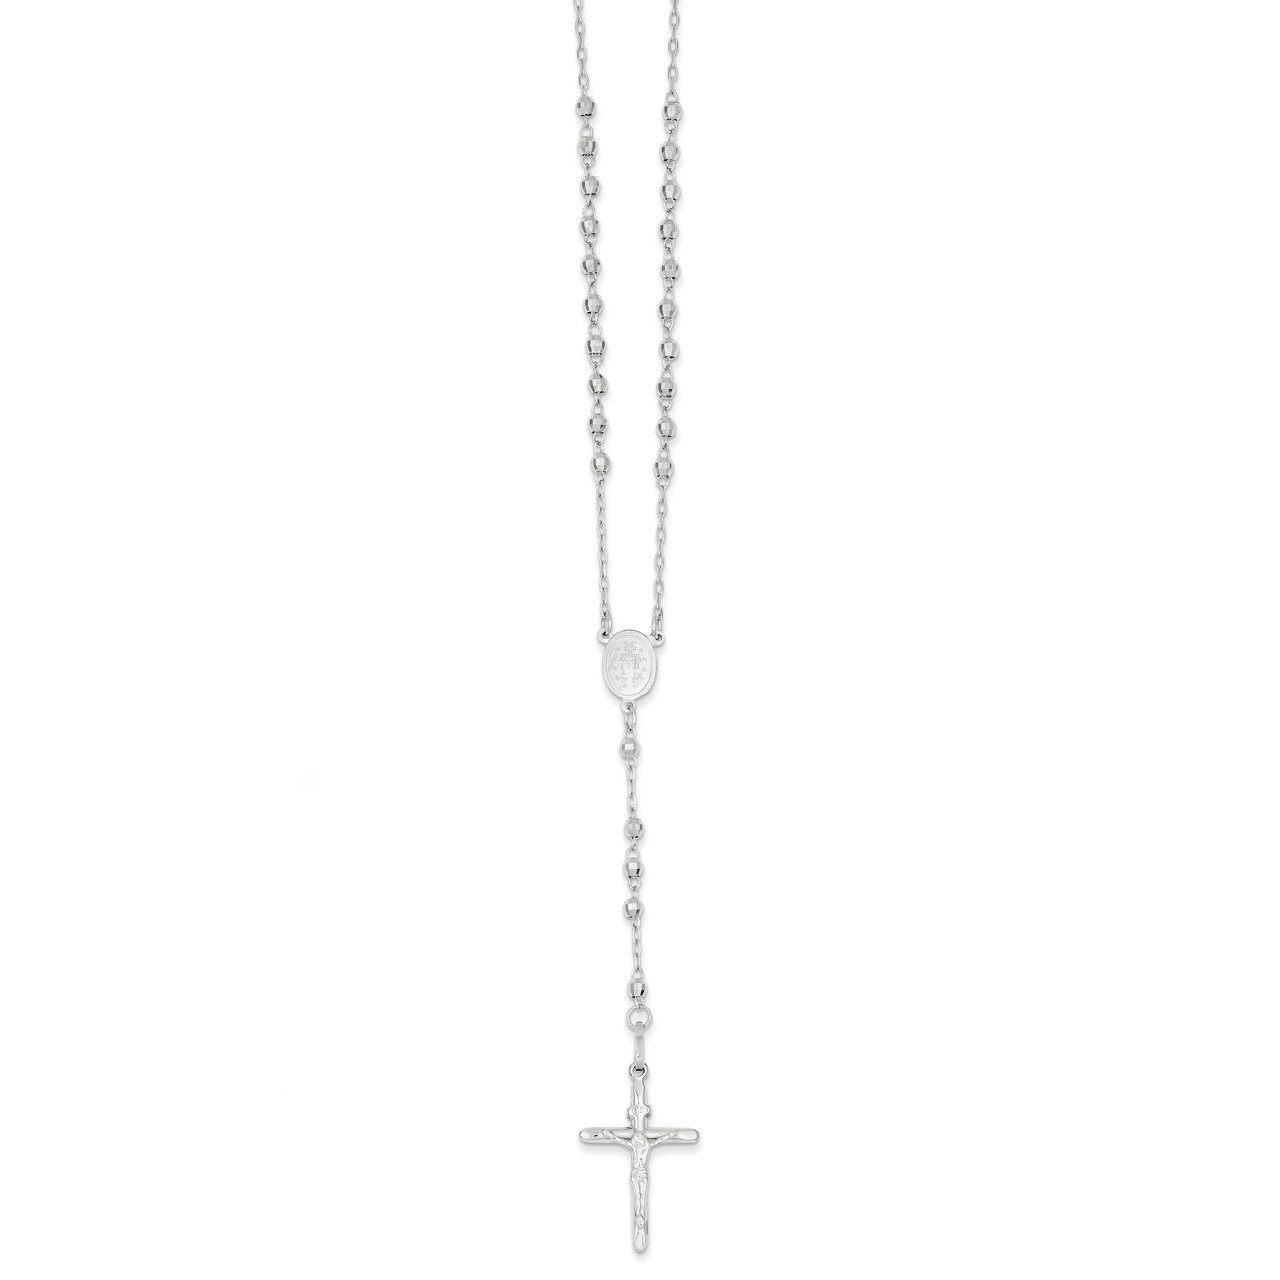 Diamond-cut 3mm Beaded Rosary Necklace 24 Inch 14k White Gold SF2064-24